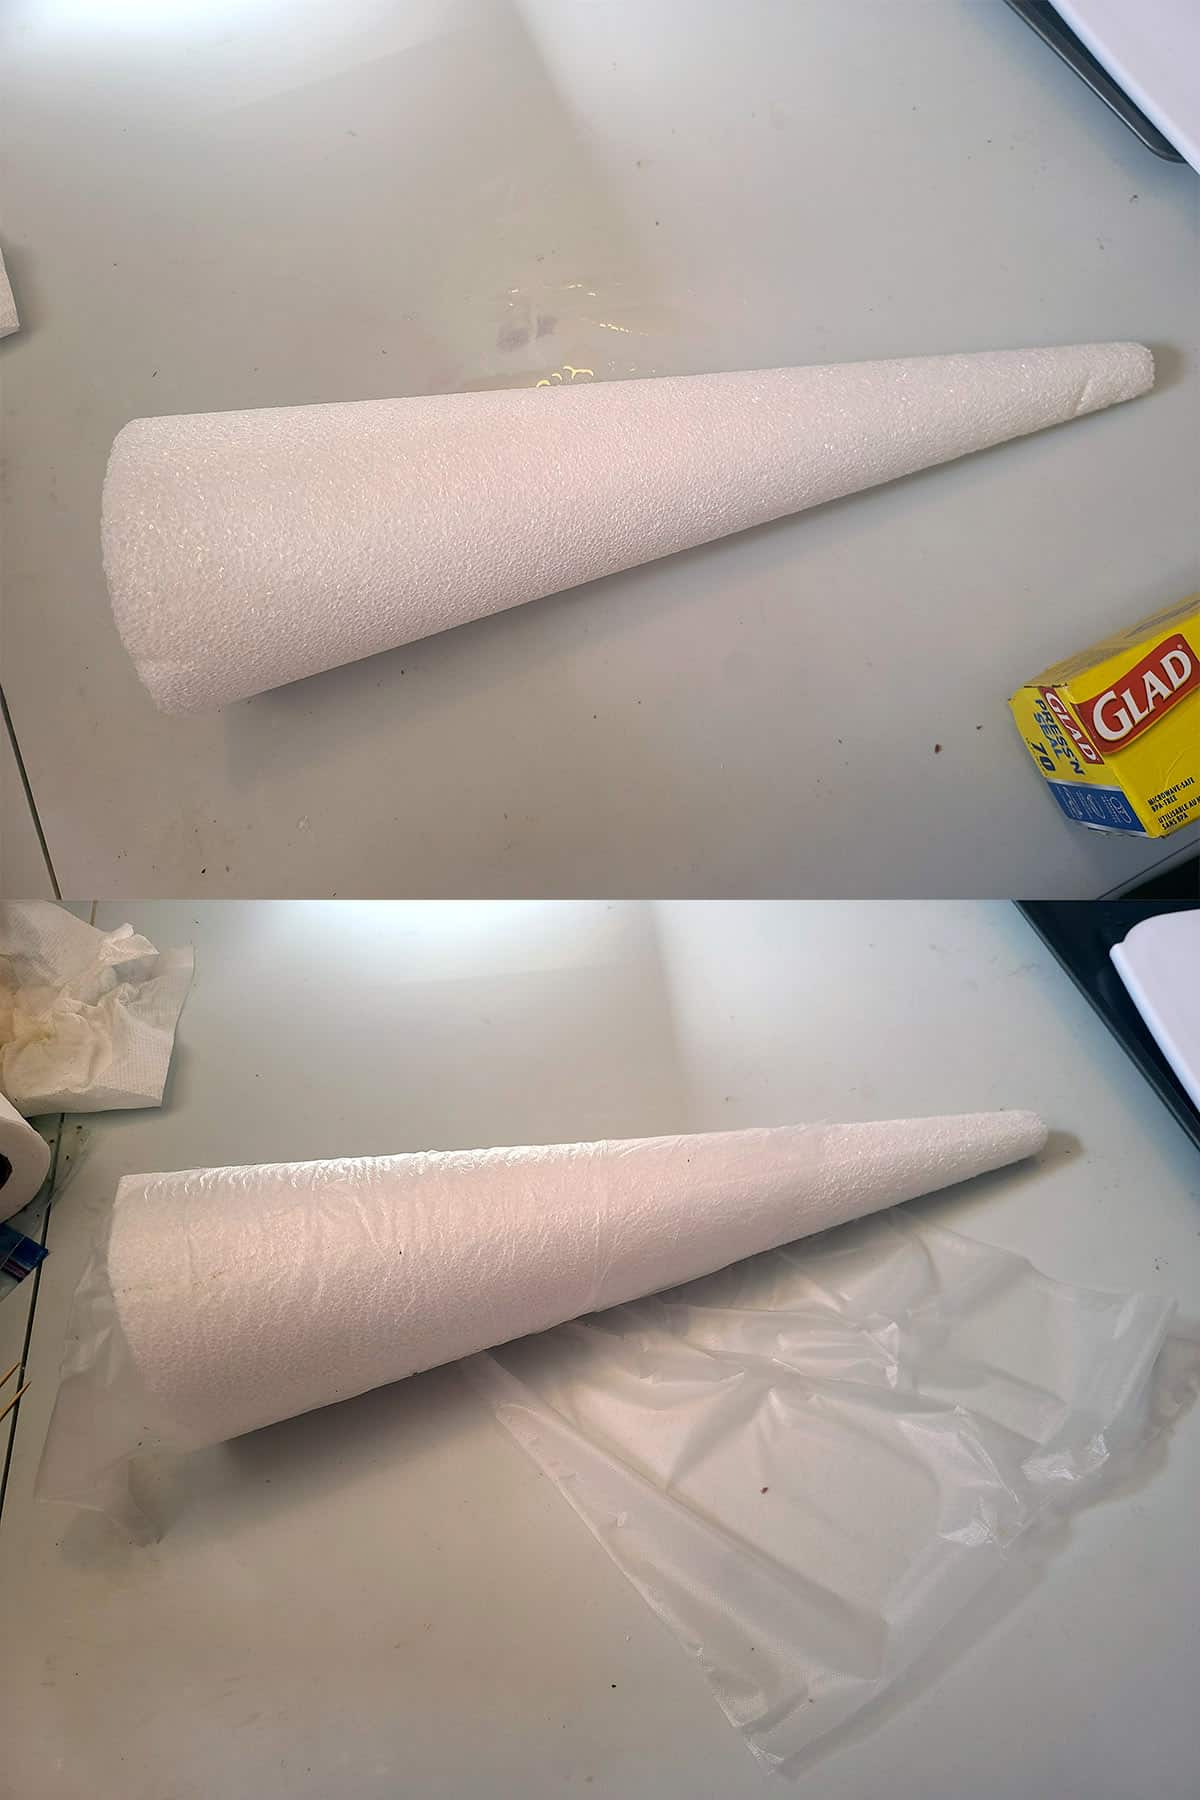 A styrofoam cone being wrapped with cling wrap.